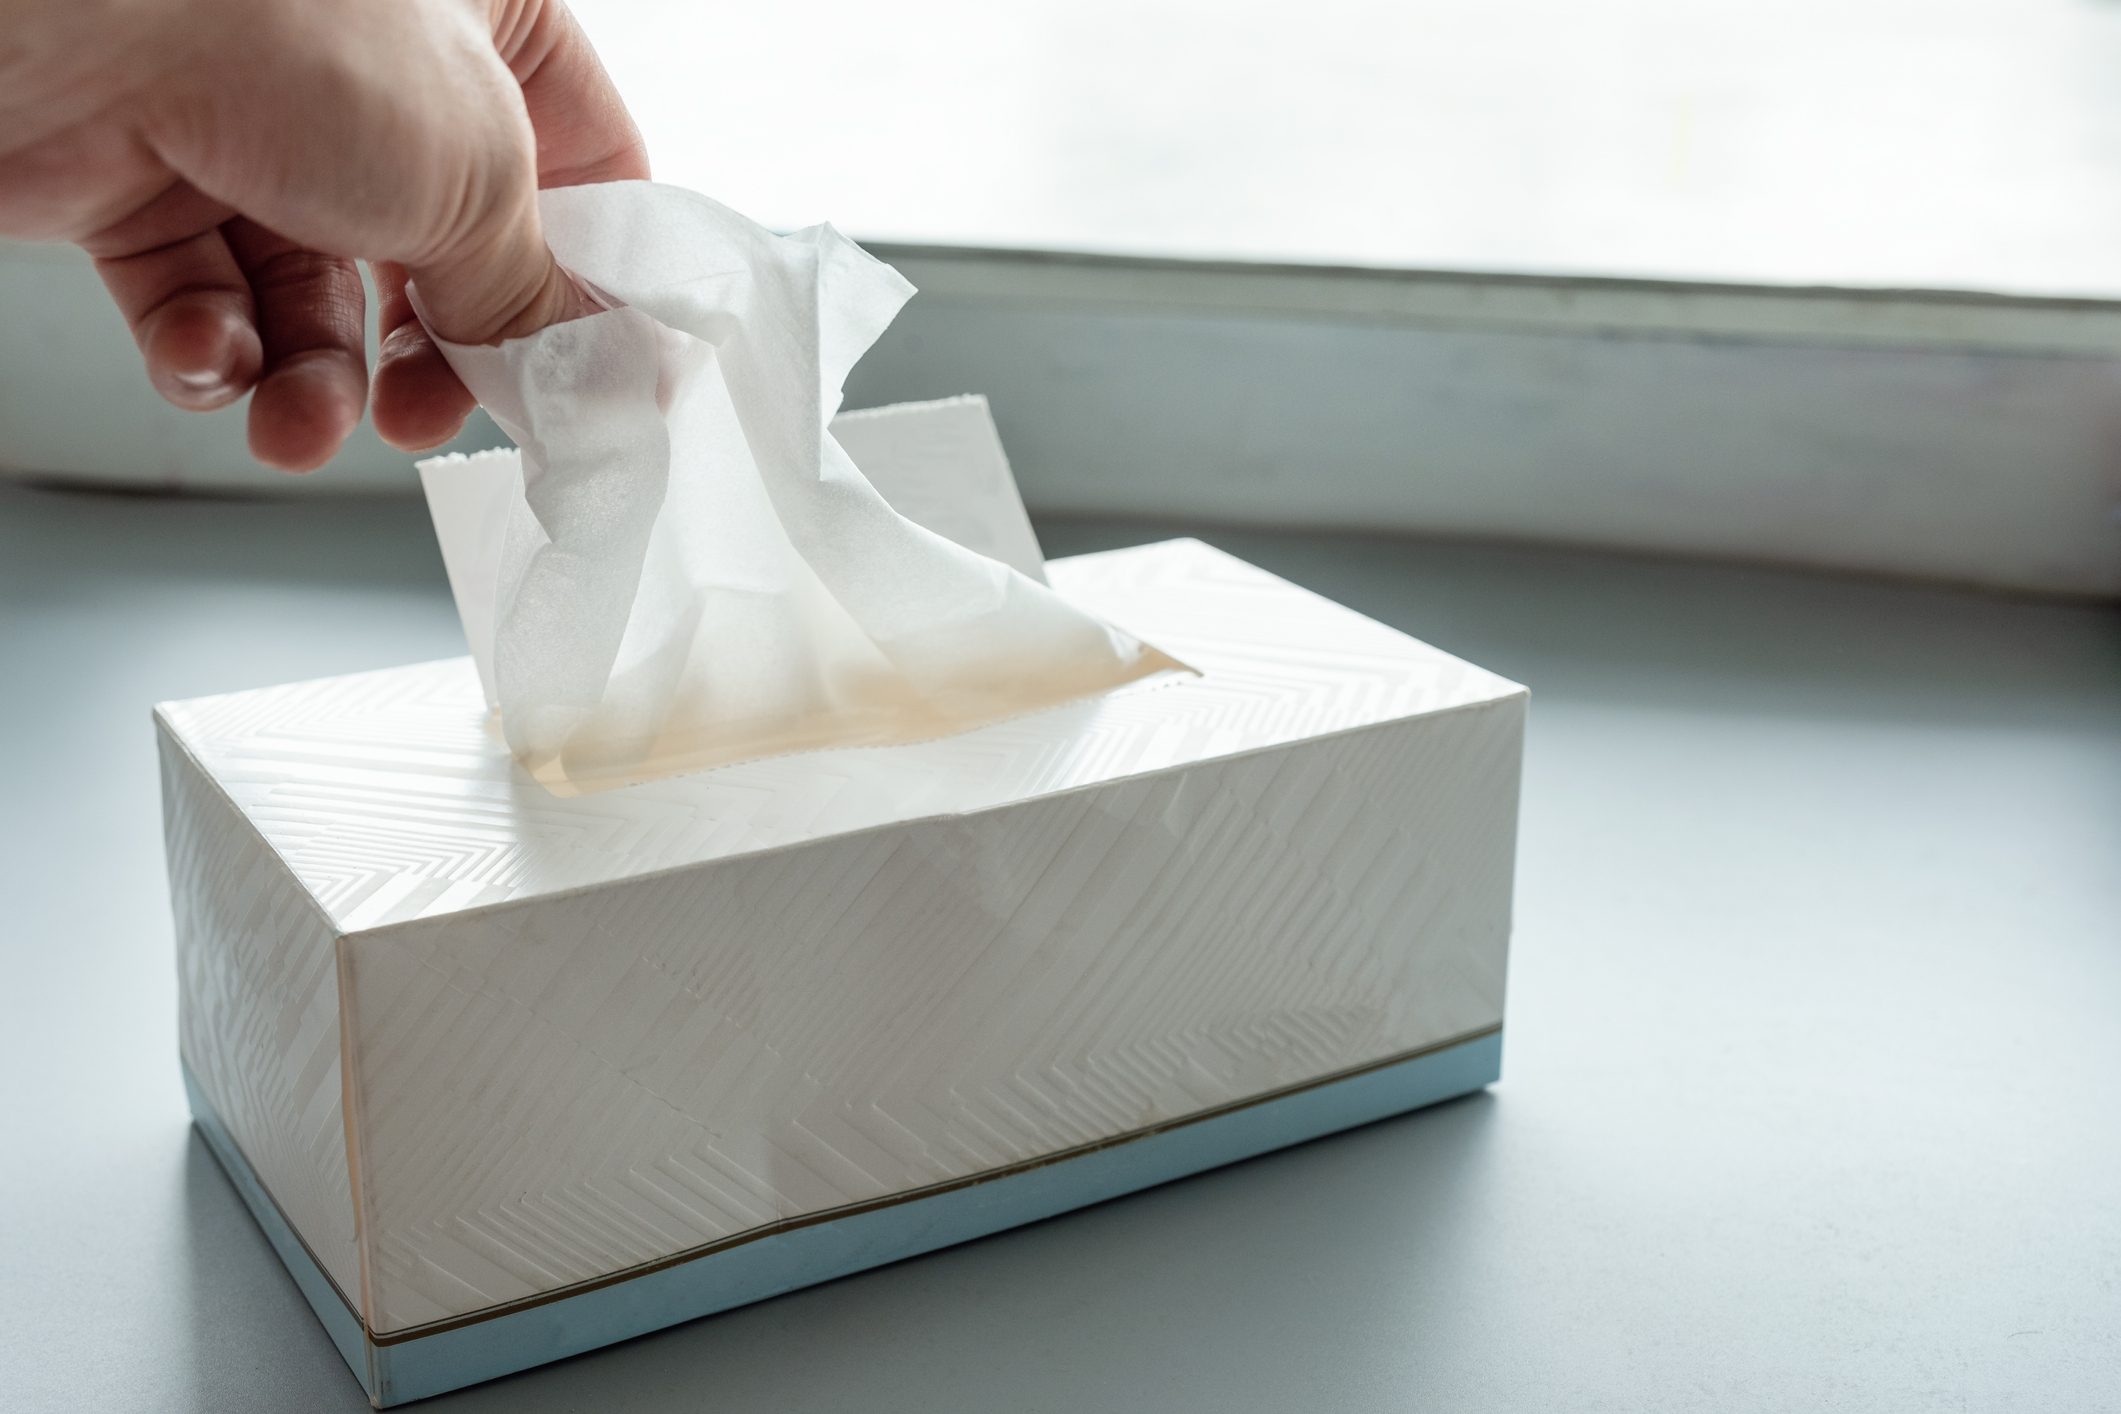 picking tissue out of tissue box